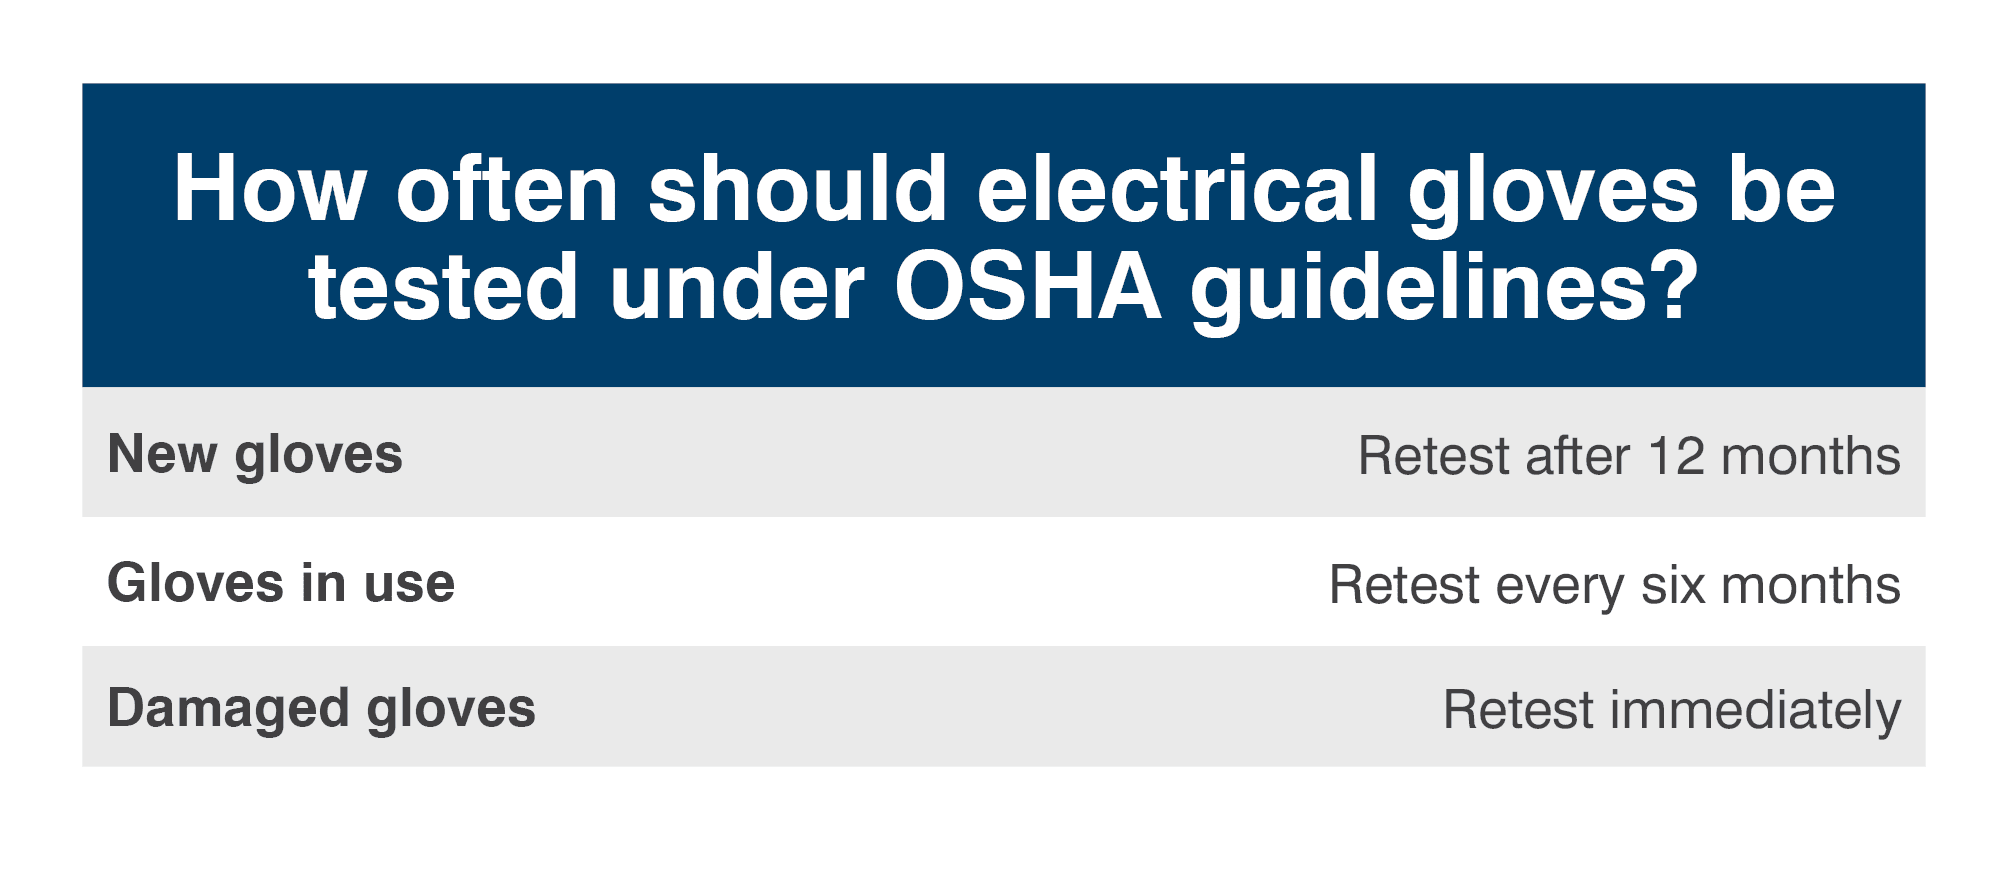 How often should electrical gloves be tested under OSHA guidelines?